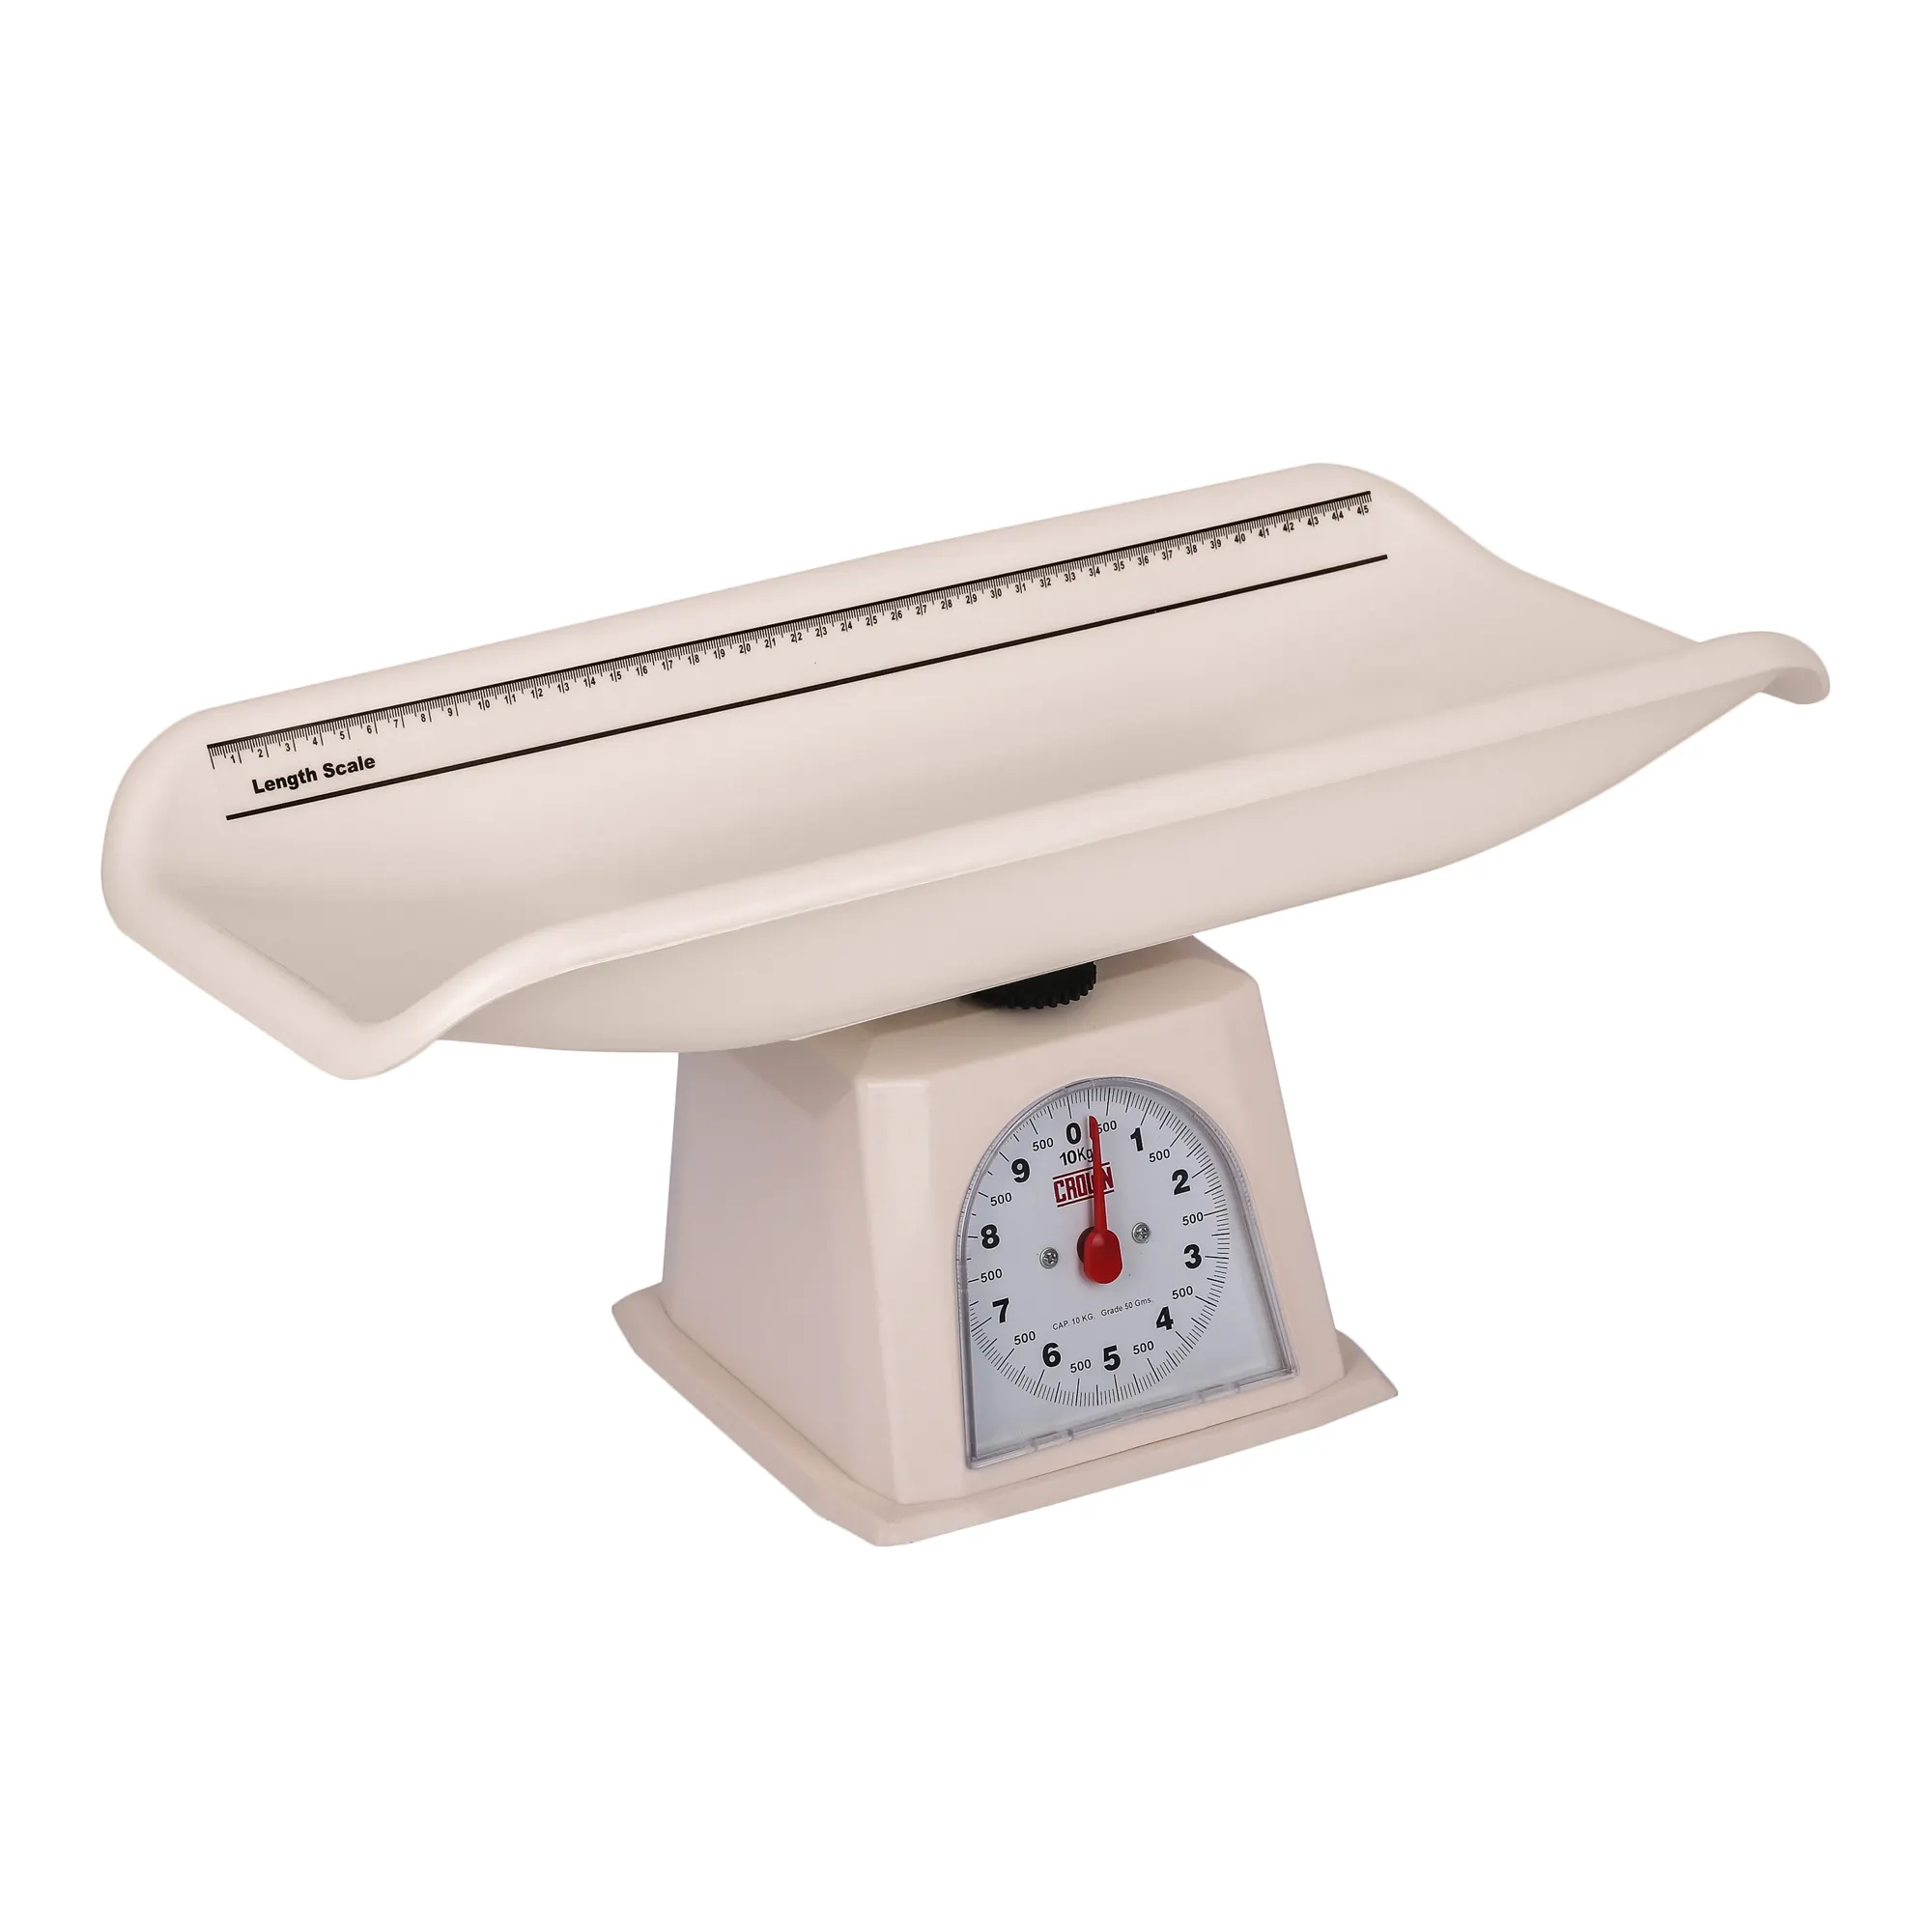 Top Quality Pan Type Manual Baby Weighing Scale up TO 10KG for Infant Babies Weight Measurement Available at wholesale price